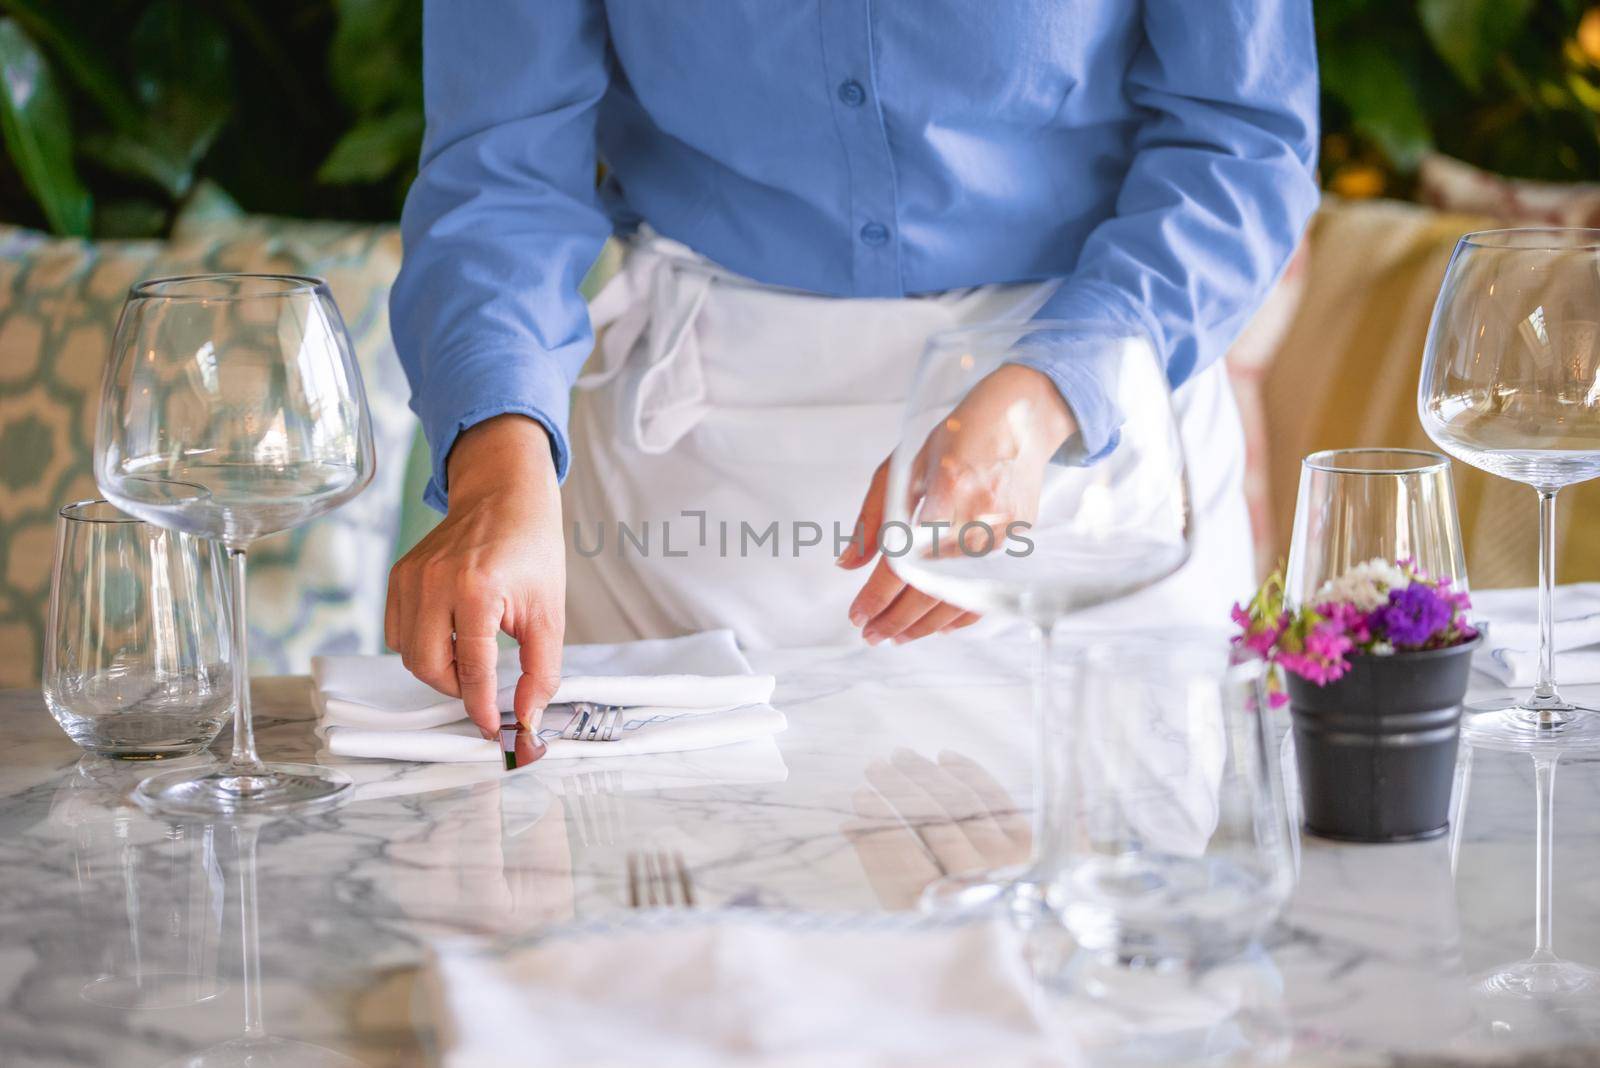 Waitress serving the empty table of the luxury restaurant by Sonat